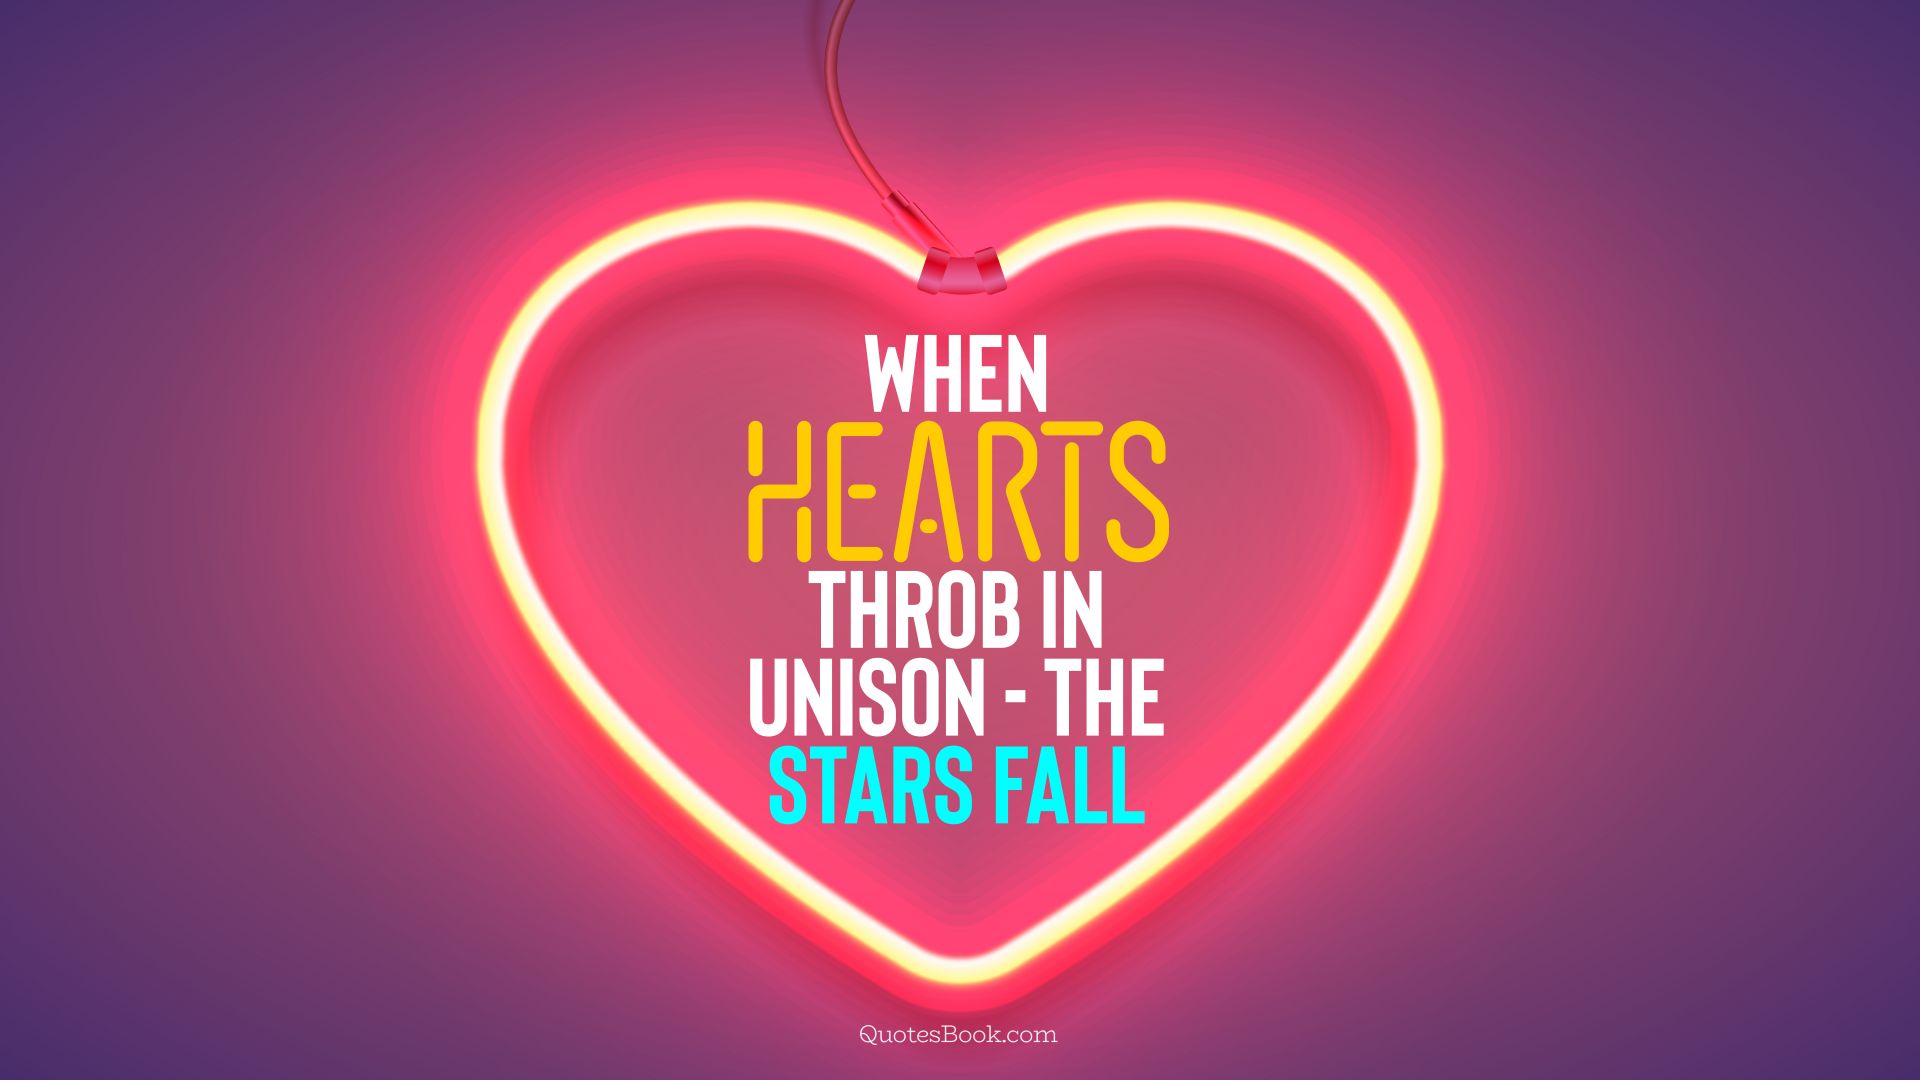 When hearts throb in unison - the stars fall. - Quote by QuotesBook